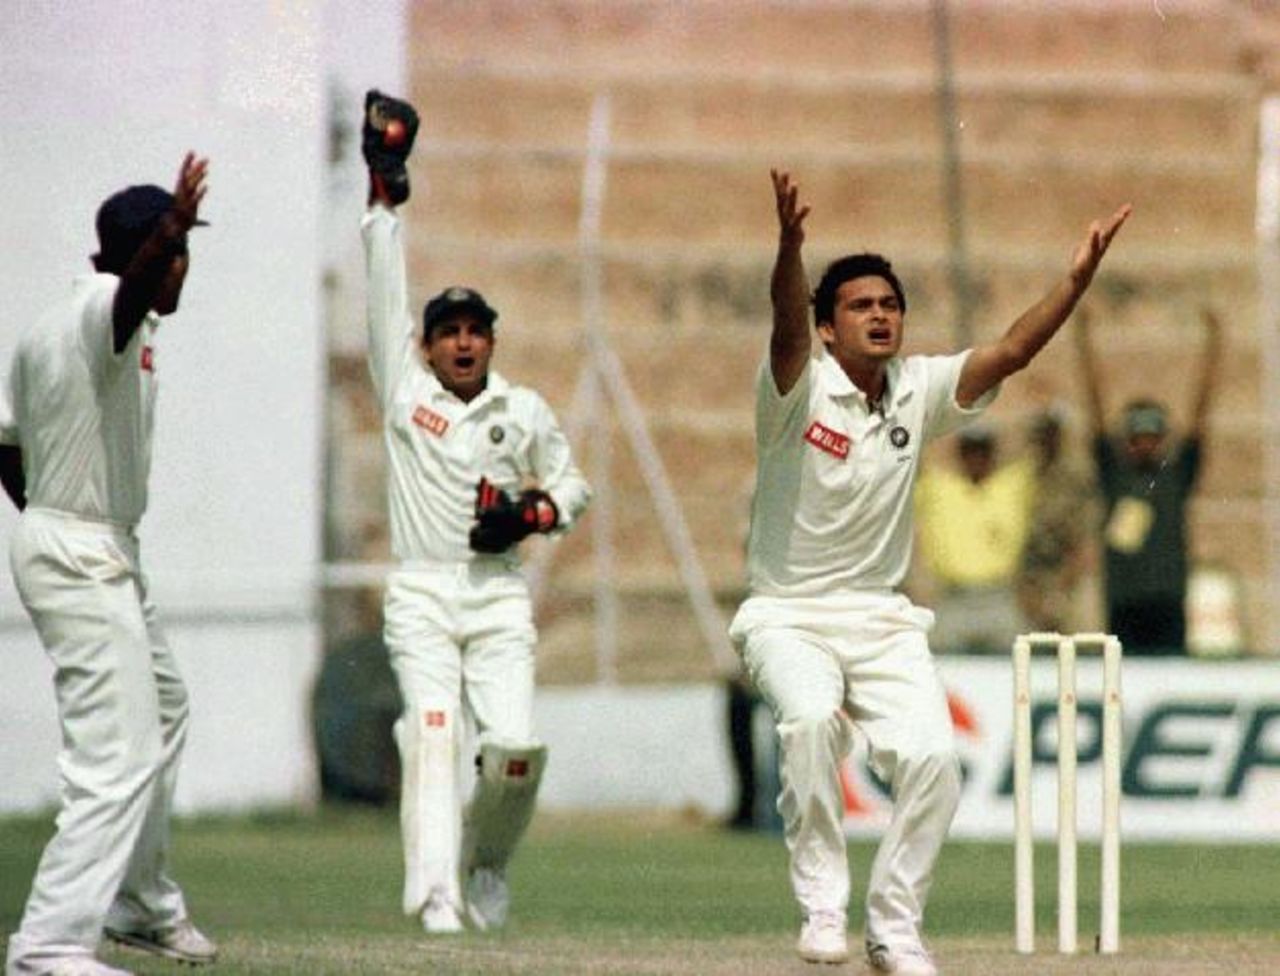 David Johnson and Nayan Mongia appeal for a catch behind the wicket on day 3 of the 1996/97 India vs Australia test at New Delhi